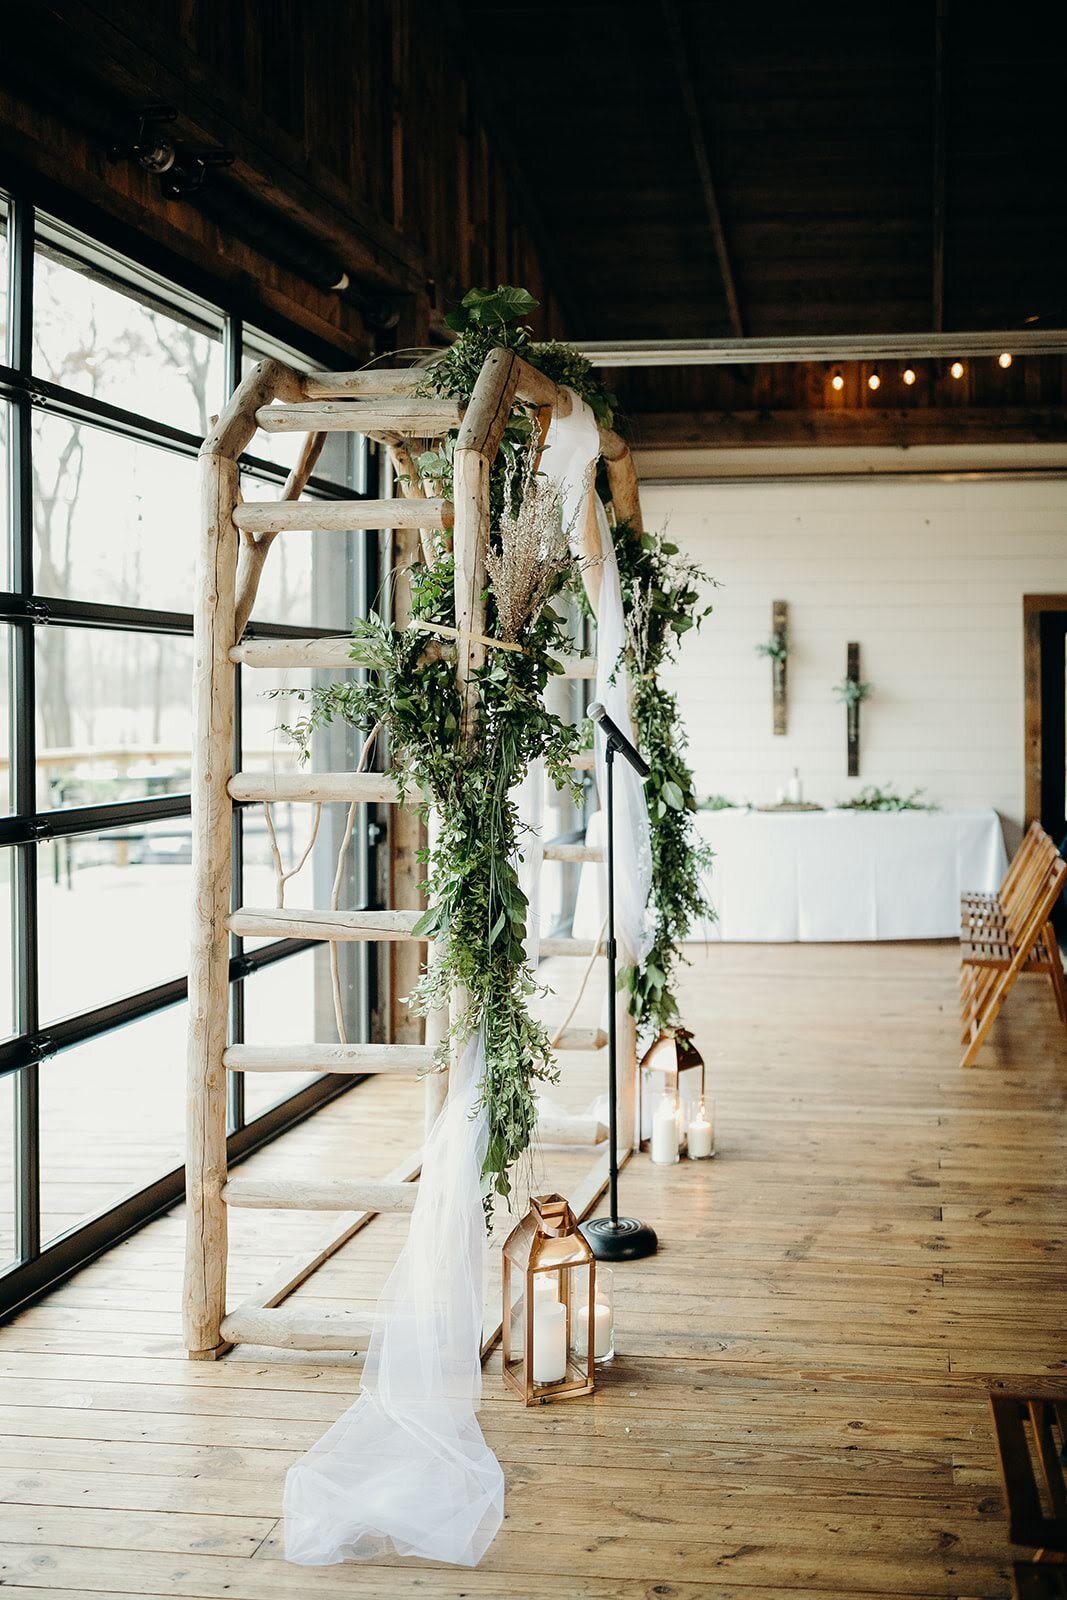 This arch added the perfect rustic touch to their wedding look.